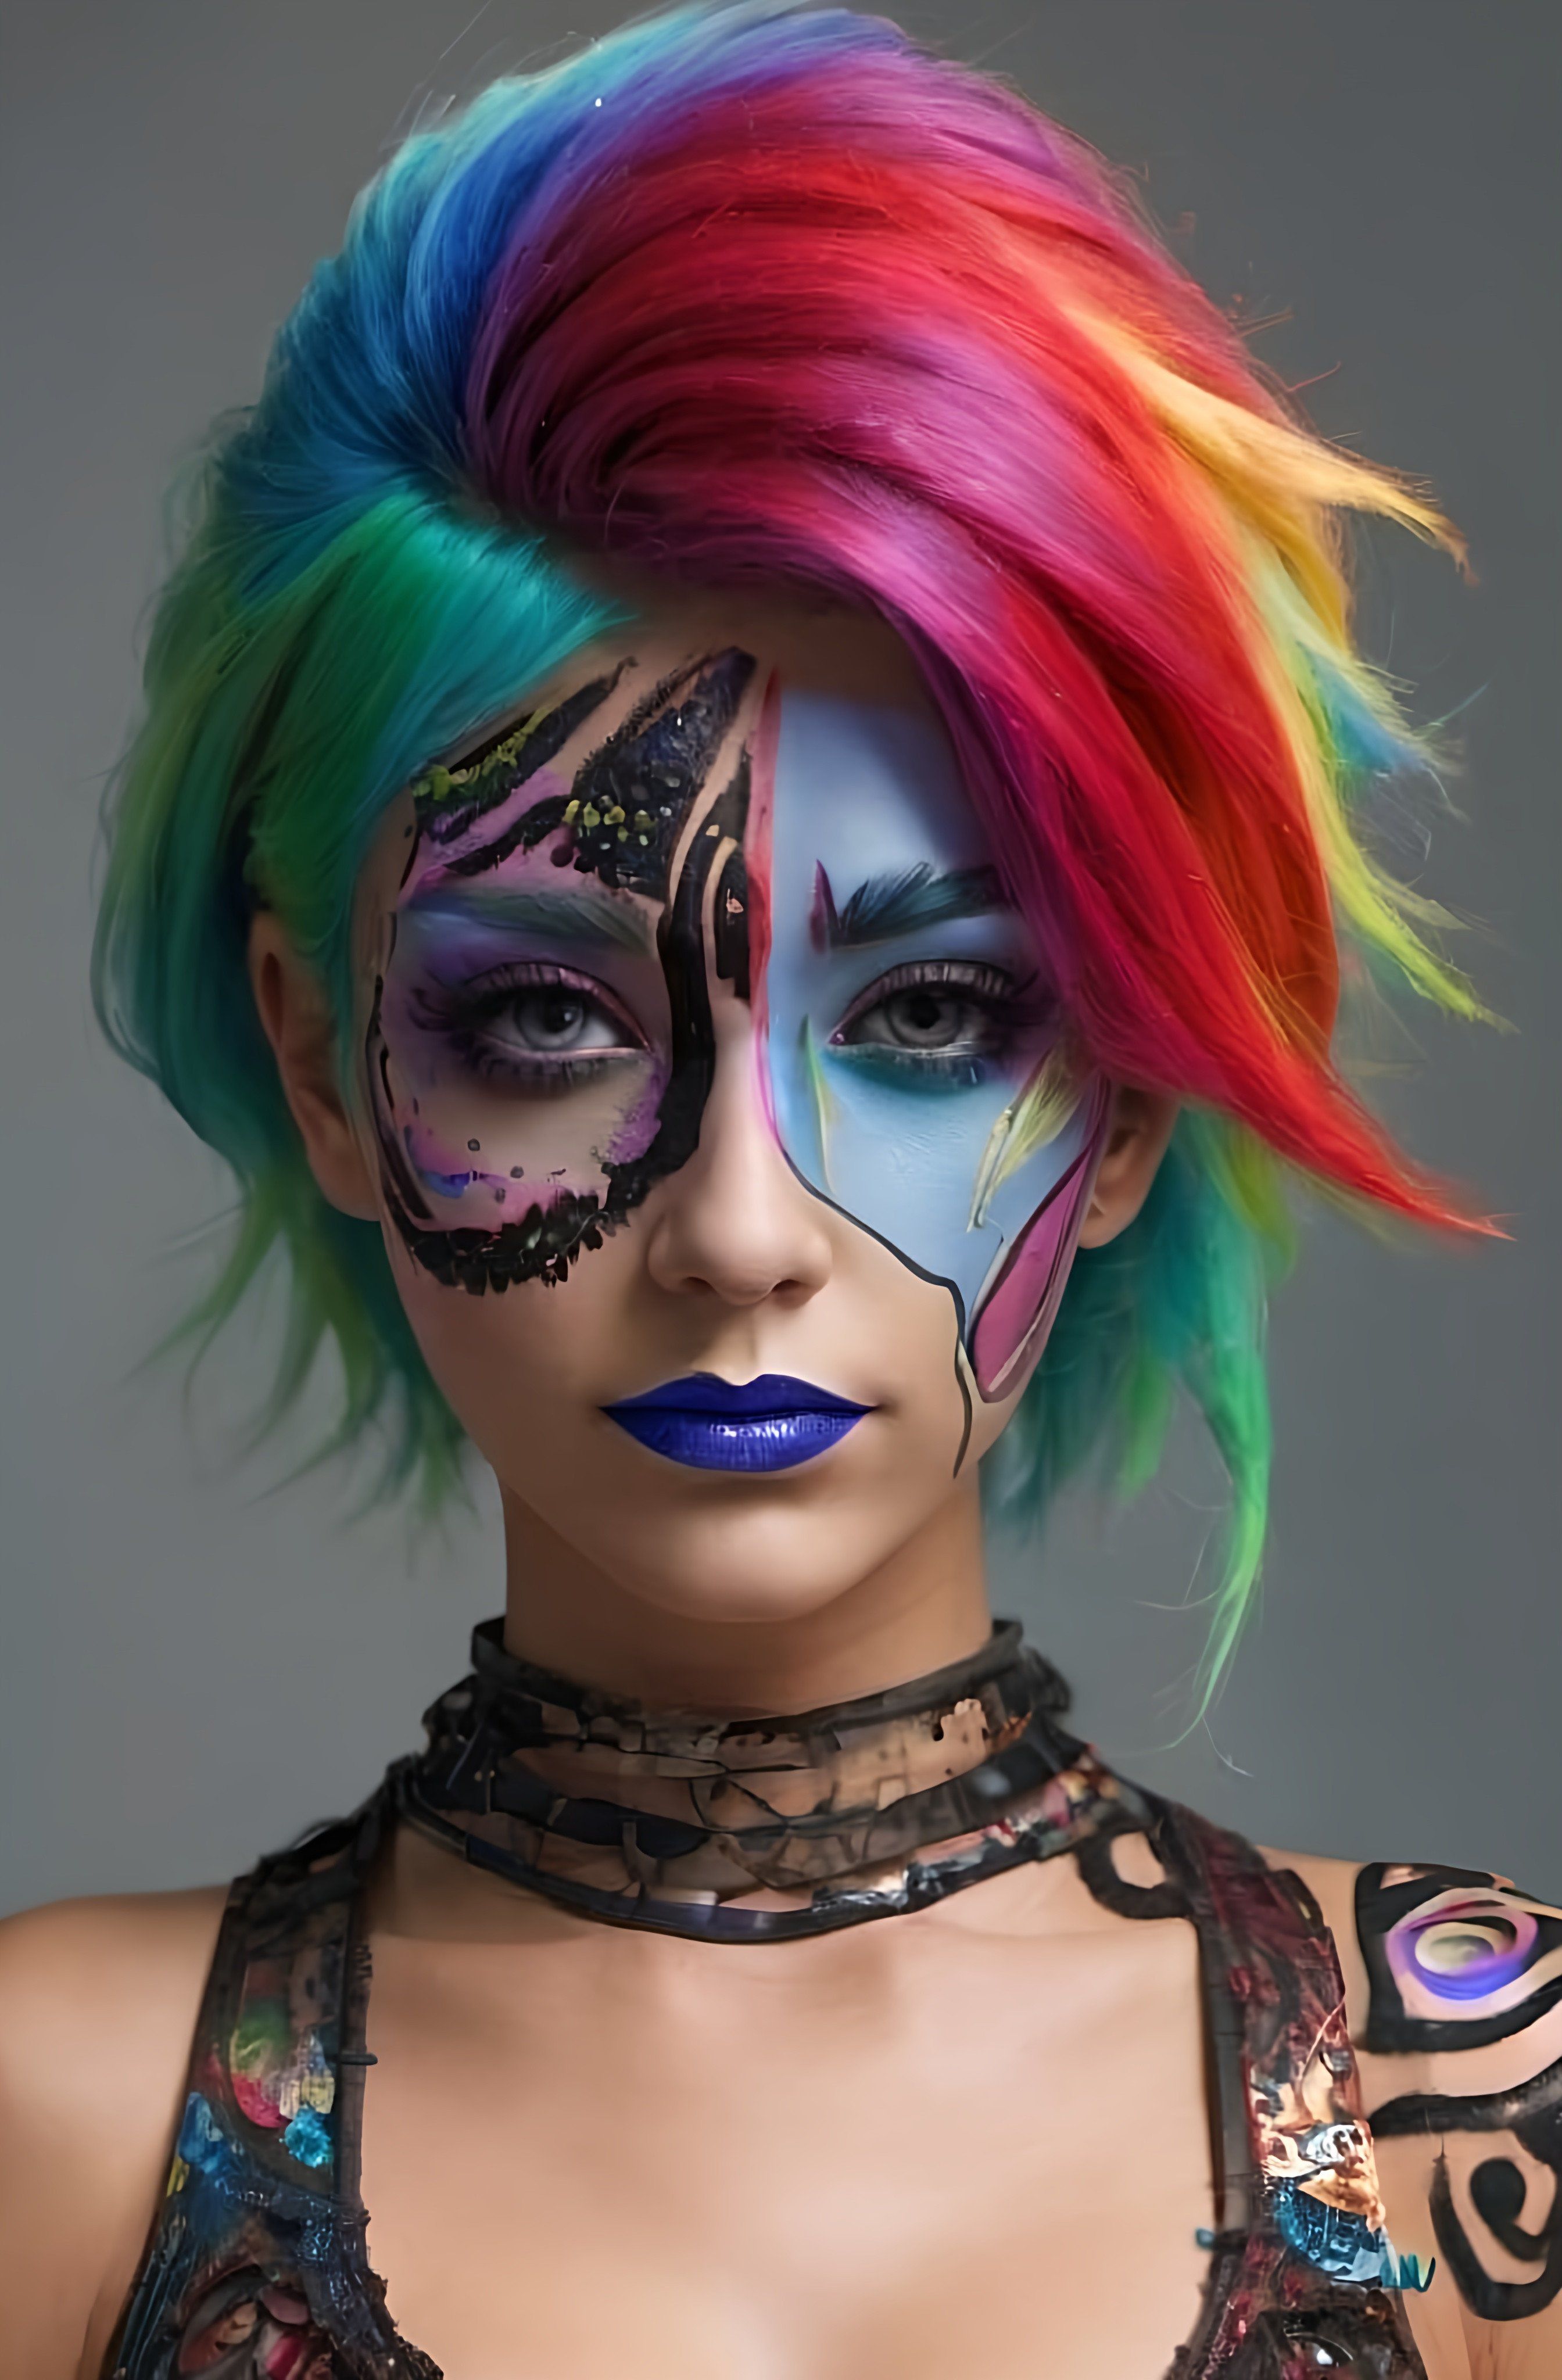 Prompt: a woman with colorful hair and makeup on her face and chest, with a colorful wig and makeup on her face